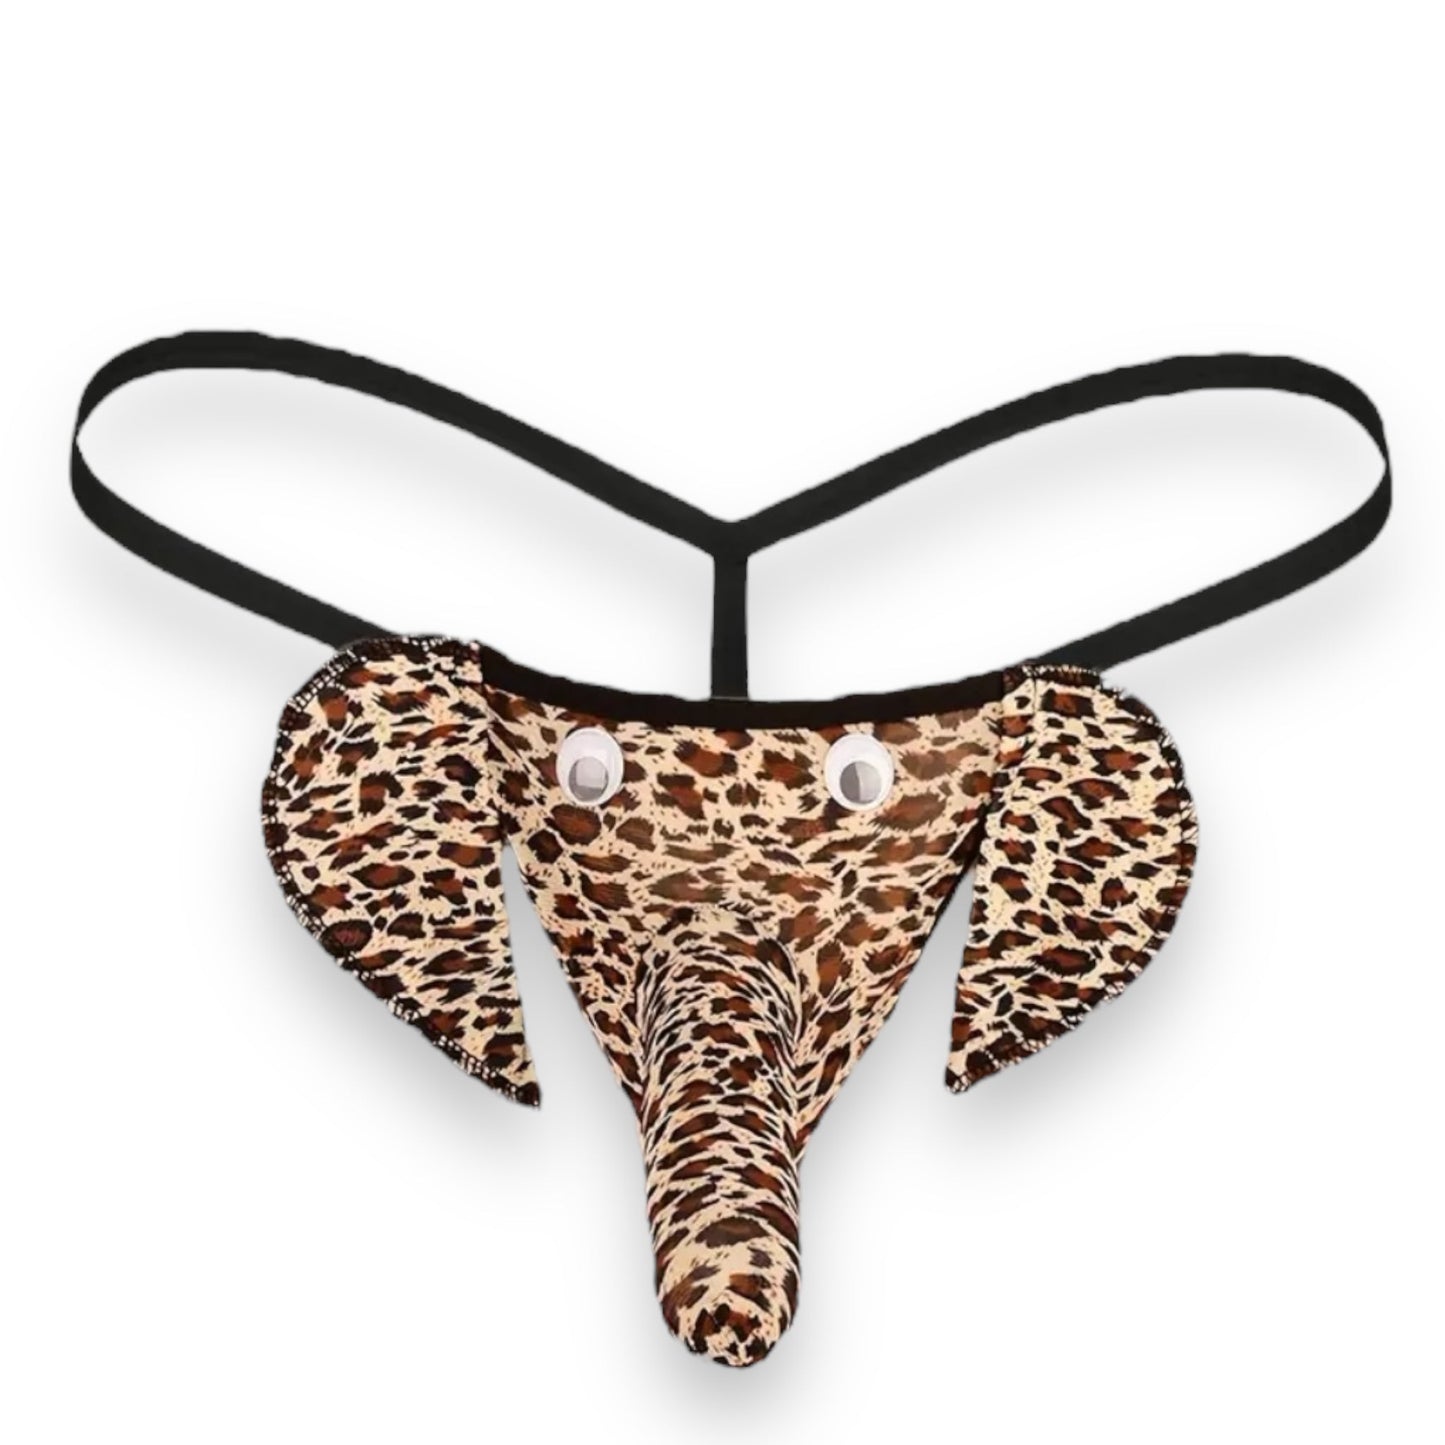 Elephant Men's Briefs in Panther Print - One Size